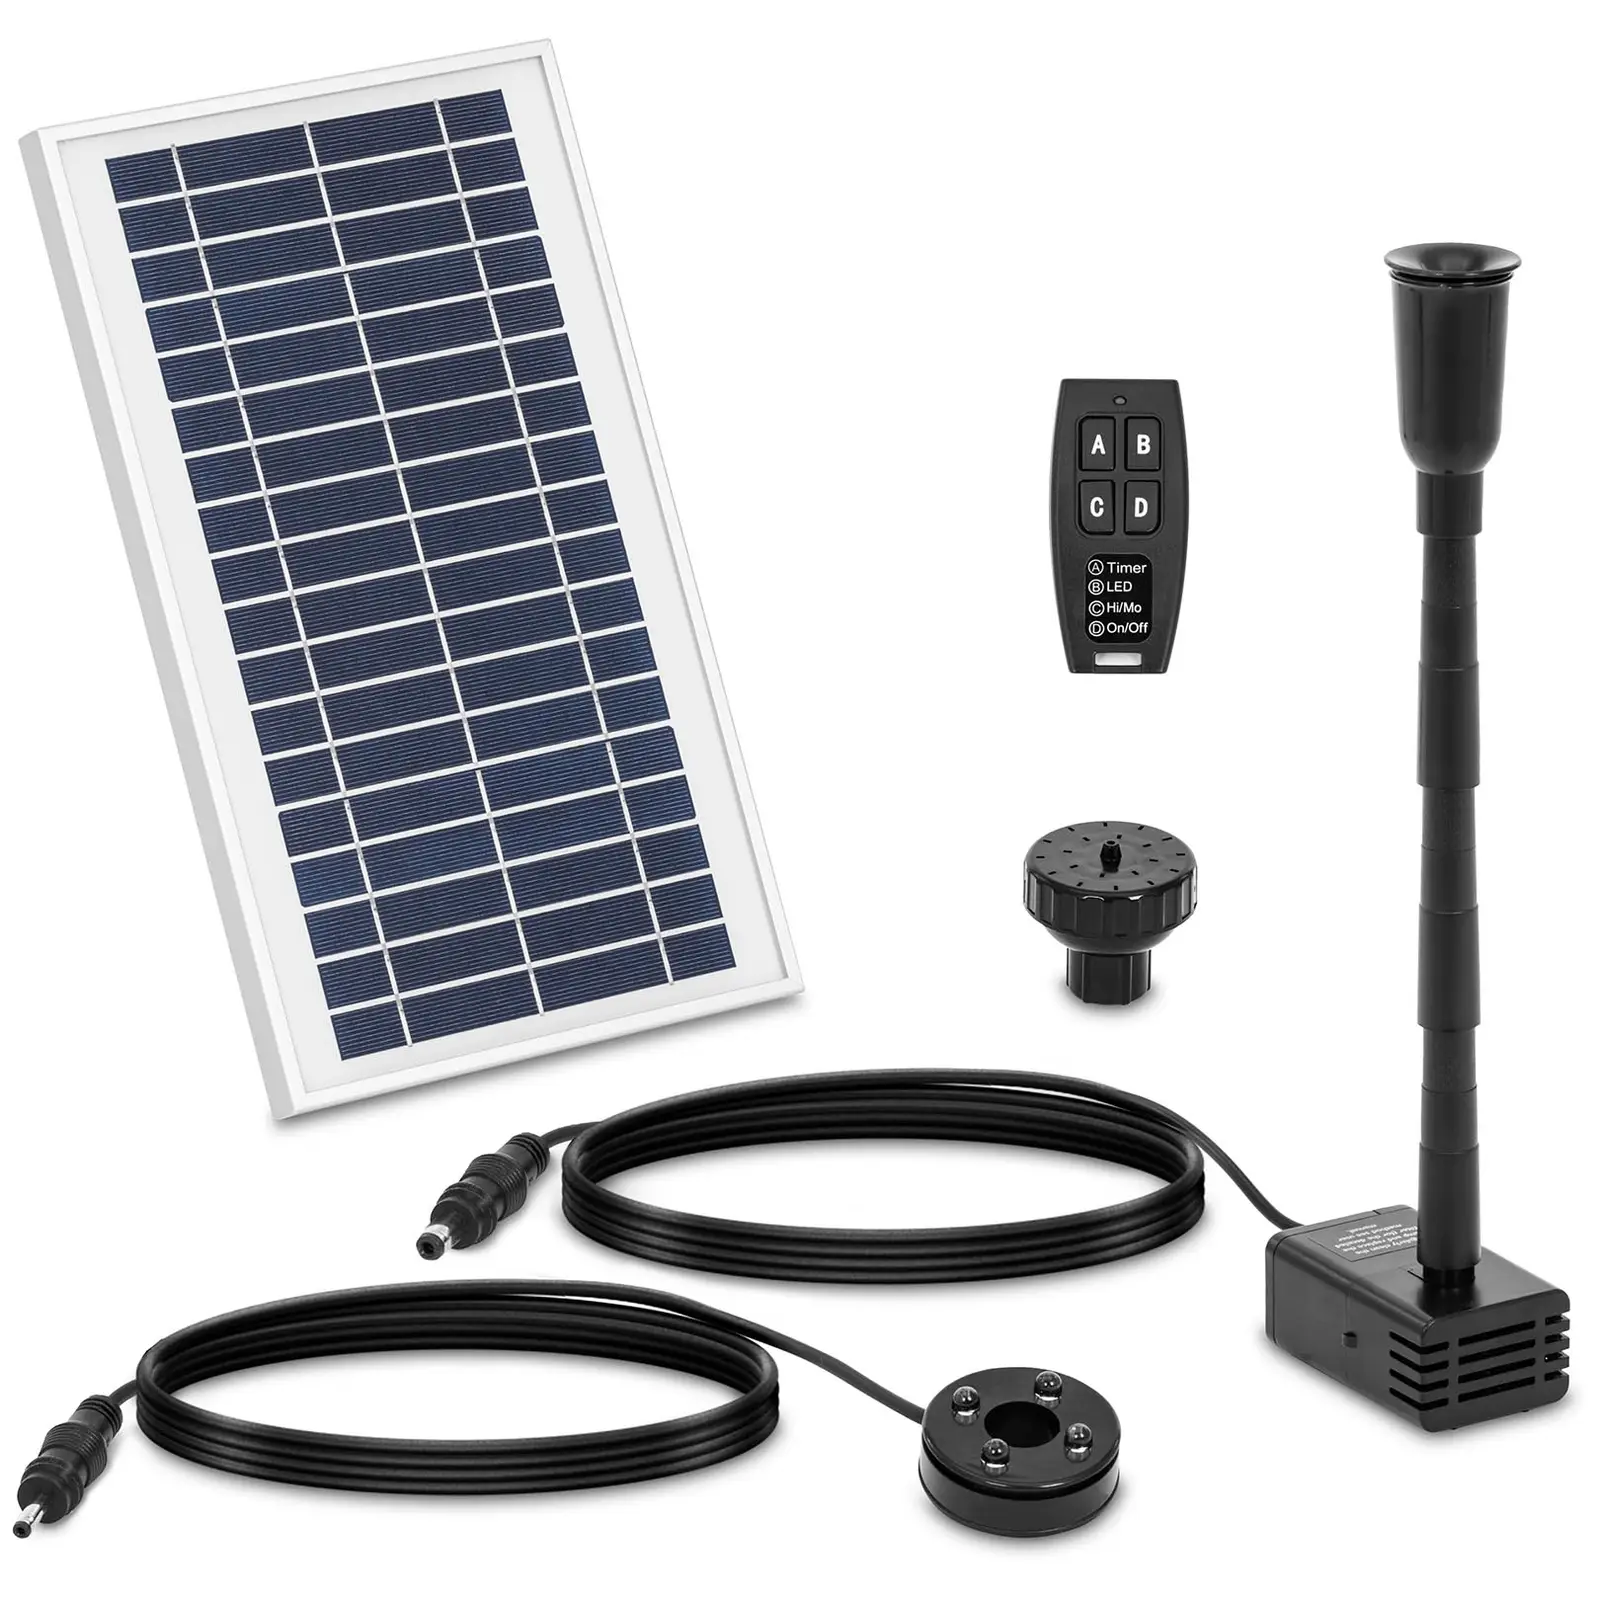 Solar Pond Pump - 600 l/h - with lighting and remote control